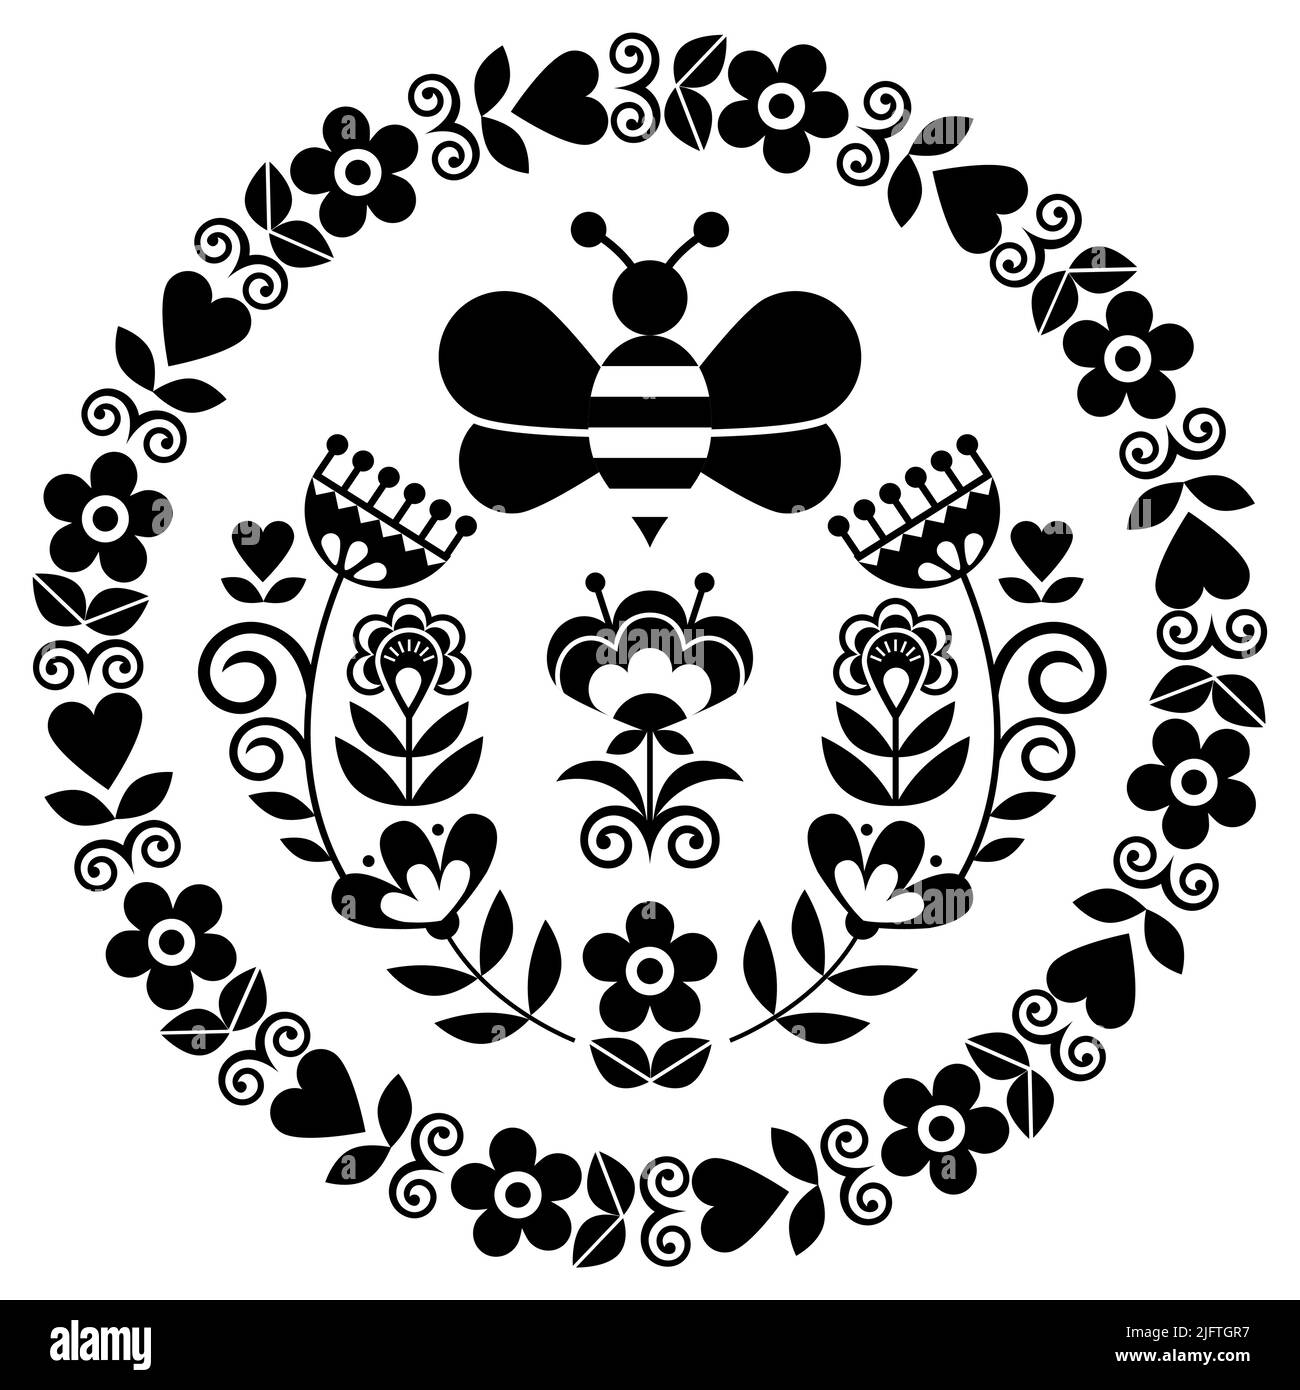 Scandinavian folk floral round vector design , nature black and white pattern with bee and flowers inspired by traditional folk art embroidery from Sw Stock Vector